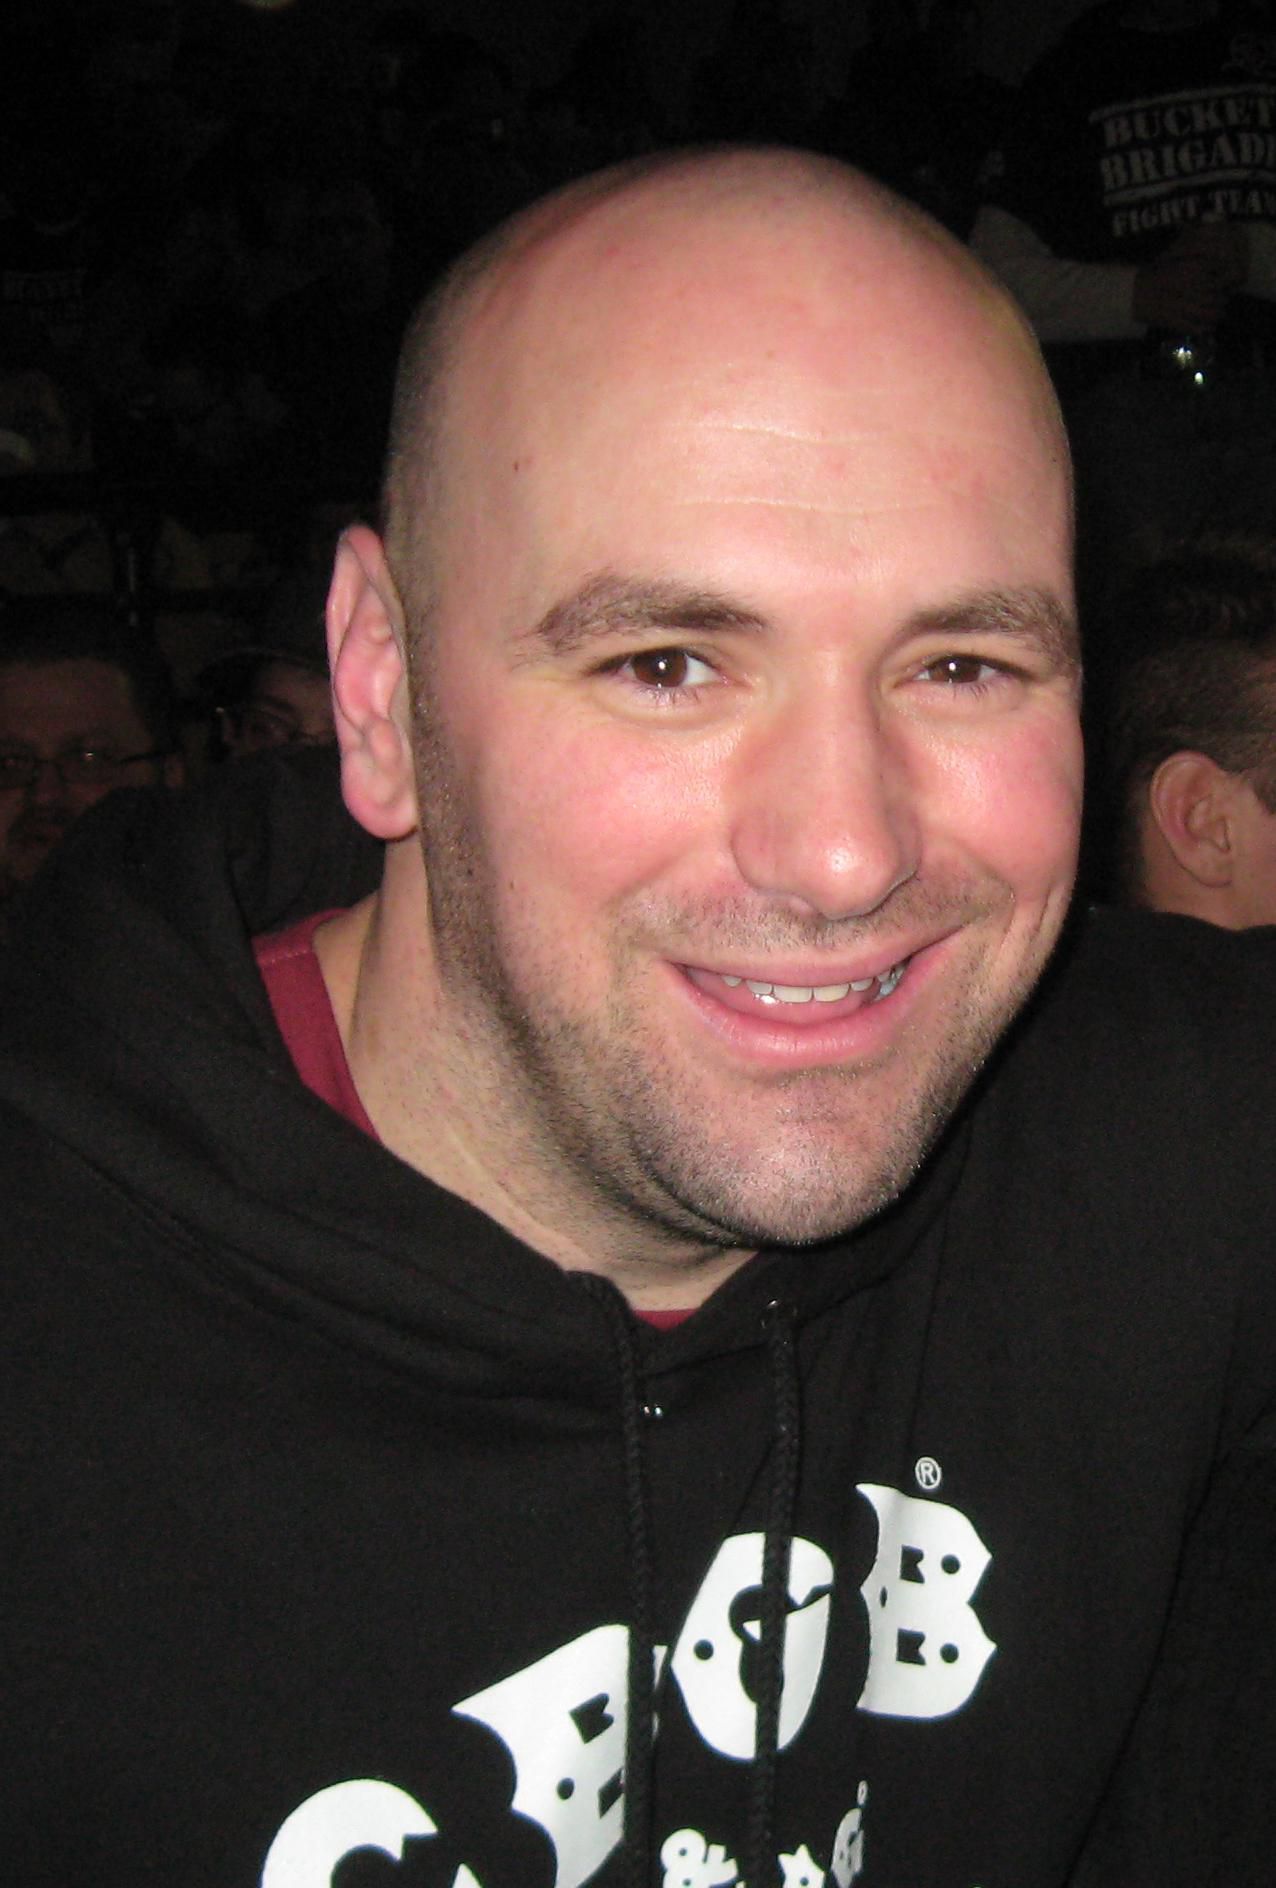 What You Need to Know About UFC President Dana White